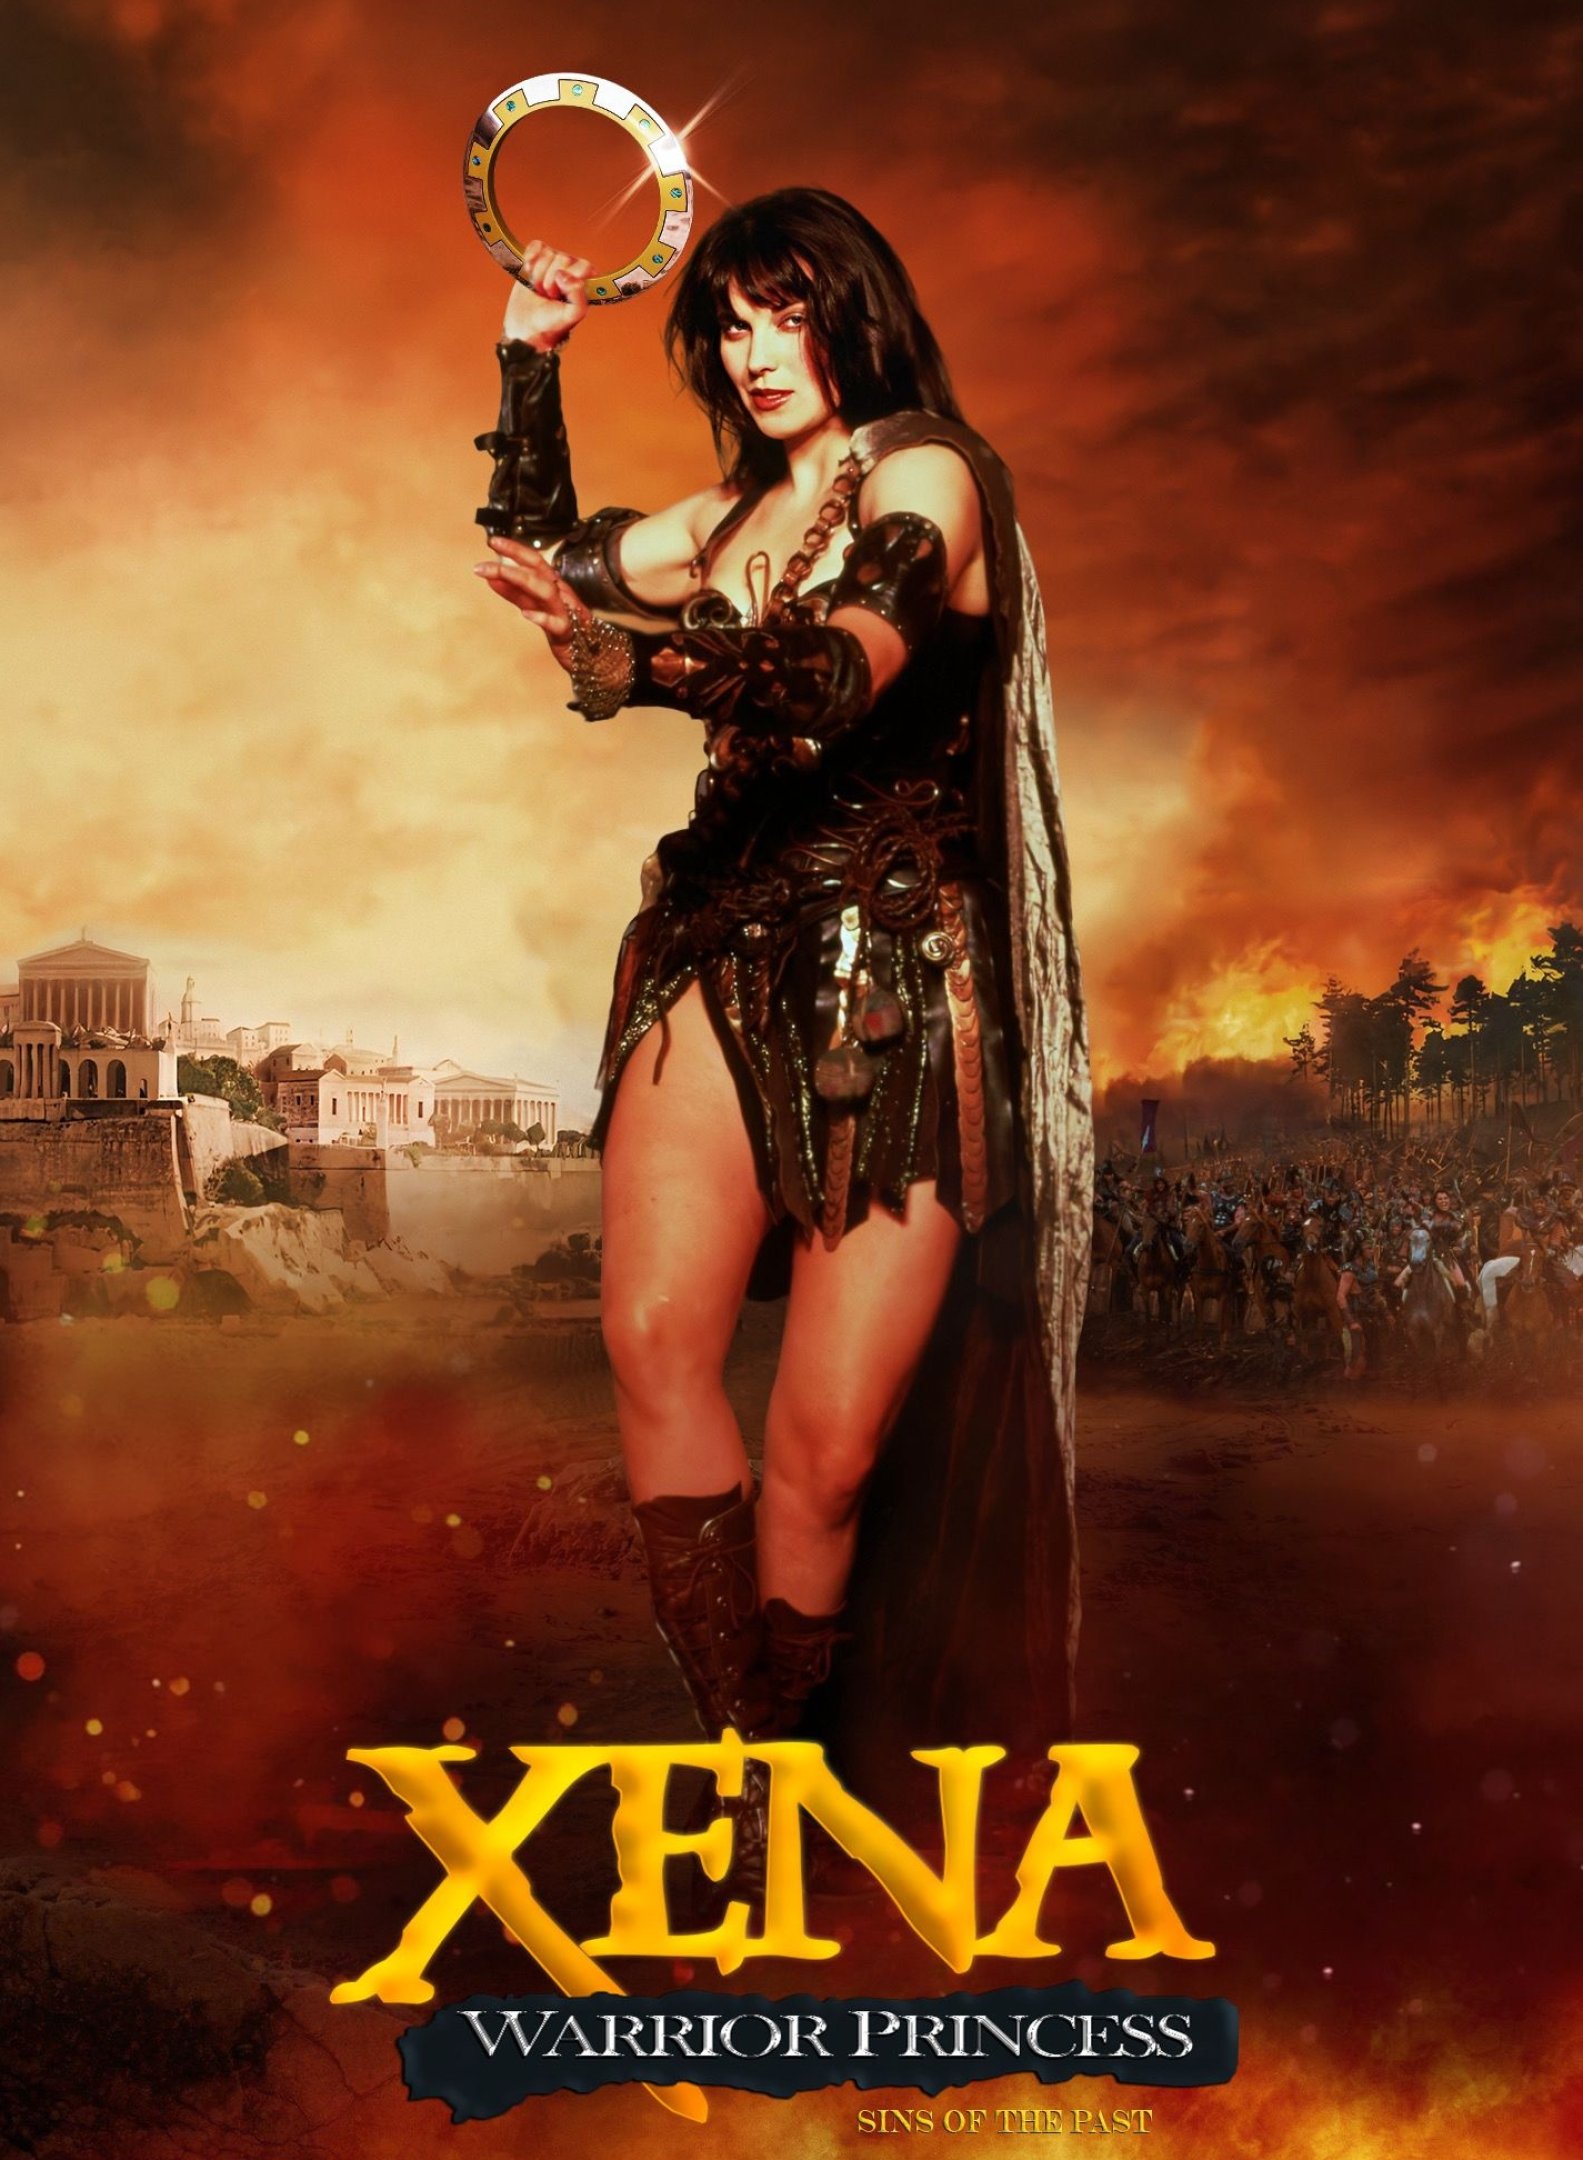 Xena: Warrior Princess (TV Series): The top-rated syndicated drama series on American television. 1590x2160 HD Background.